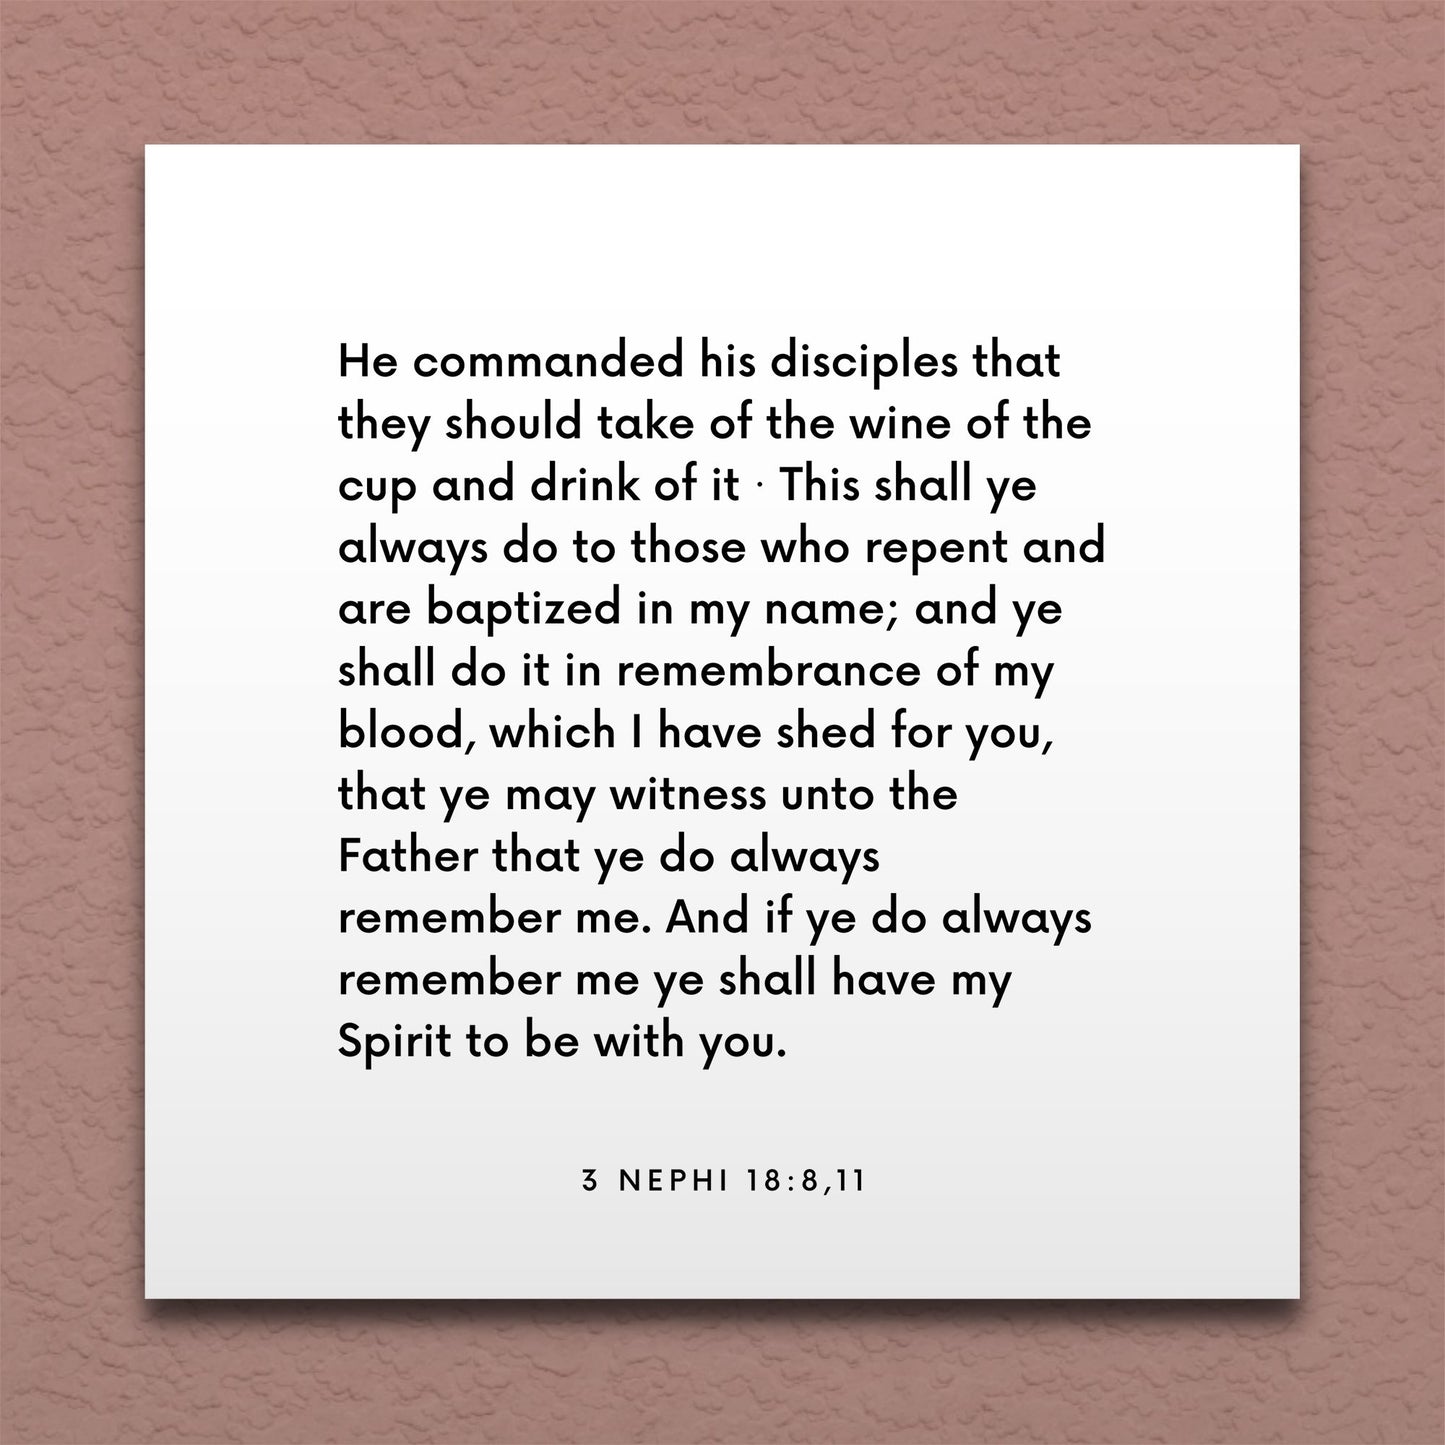 Wall-mounted scripture tile for 3 Nephi 18:8,11 - "This shall ye always do in remembrance of my blood"